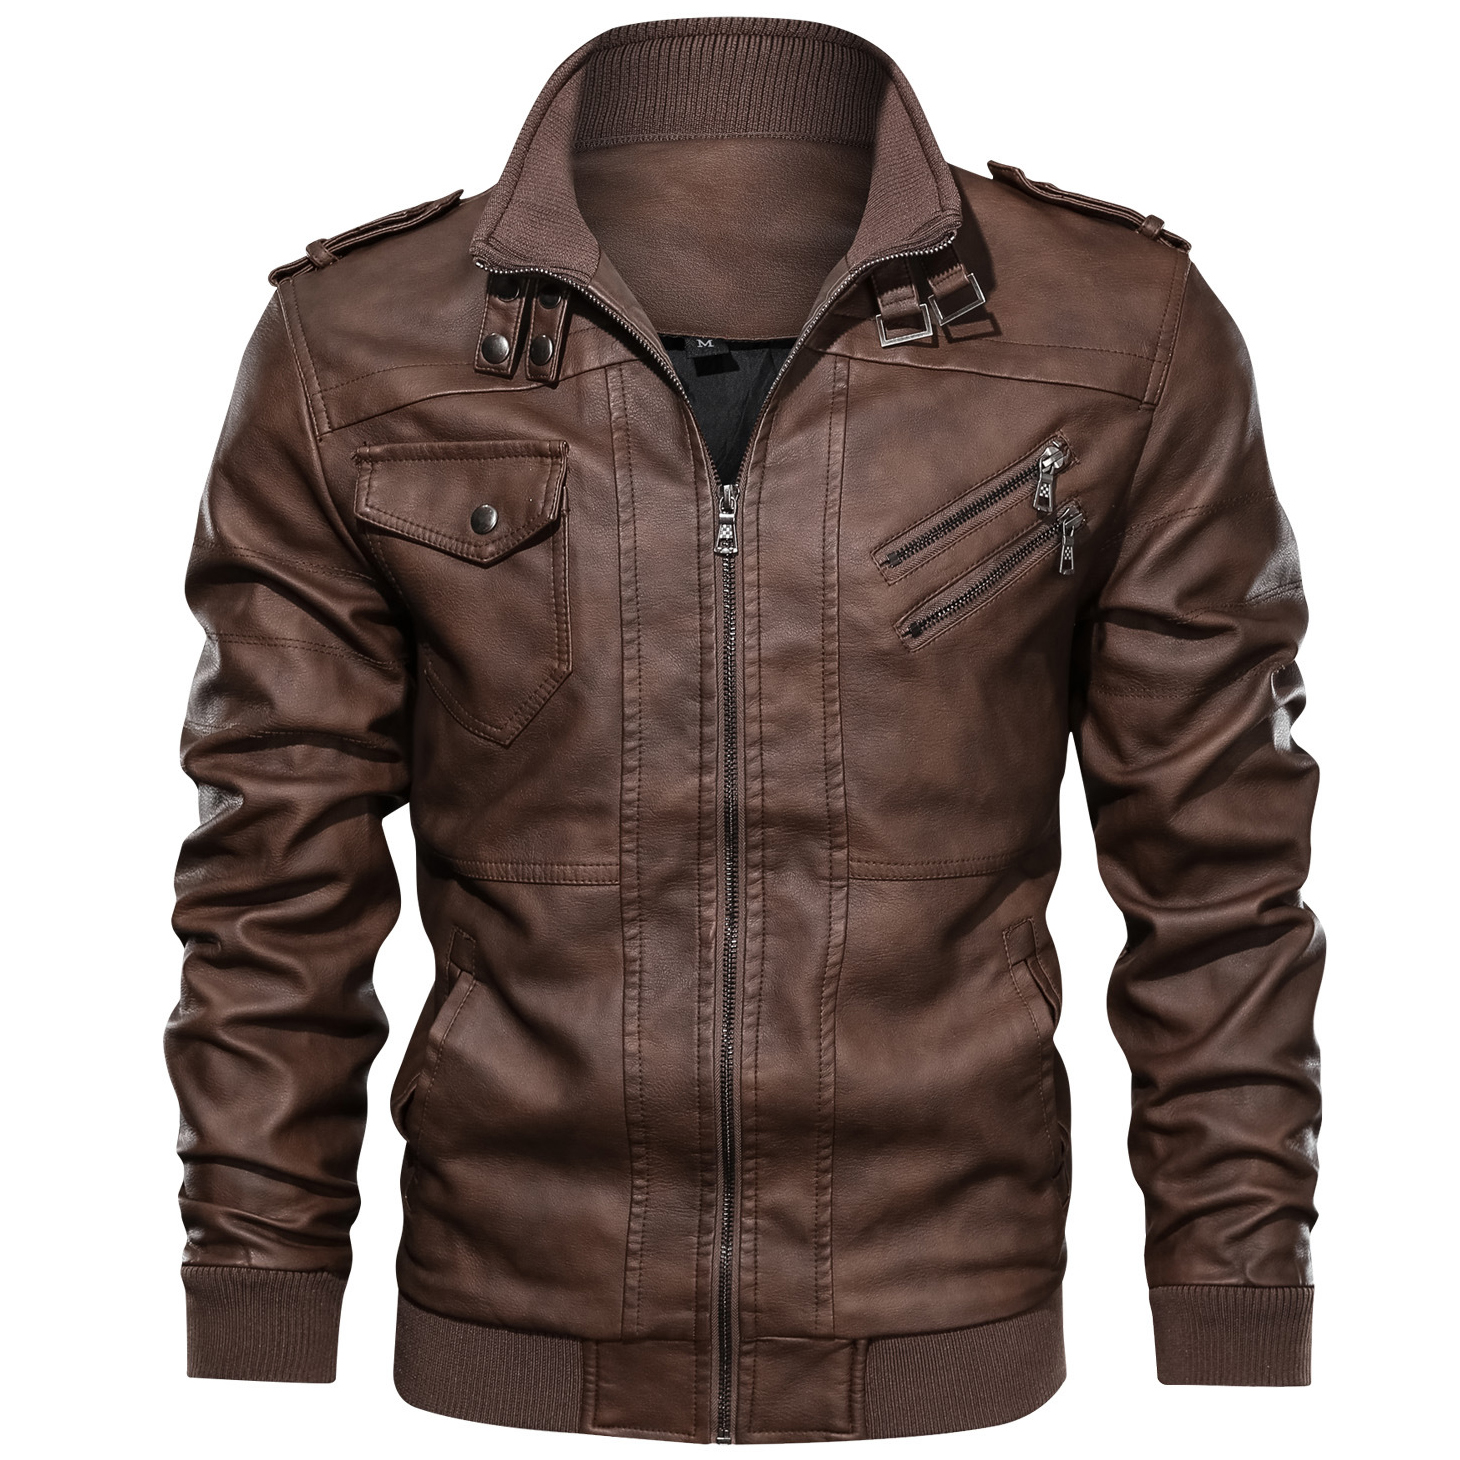 Men's Outdoor Windproof Warm Chic Casual Motorcycle Leather Jacket